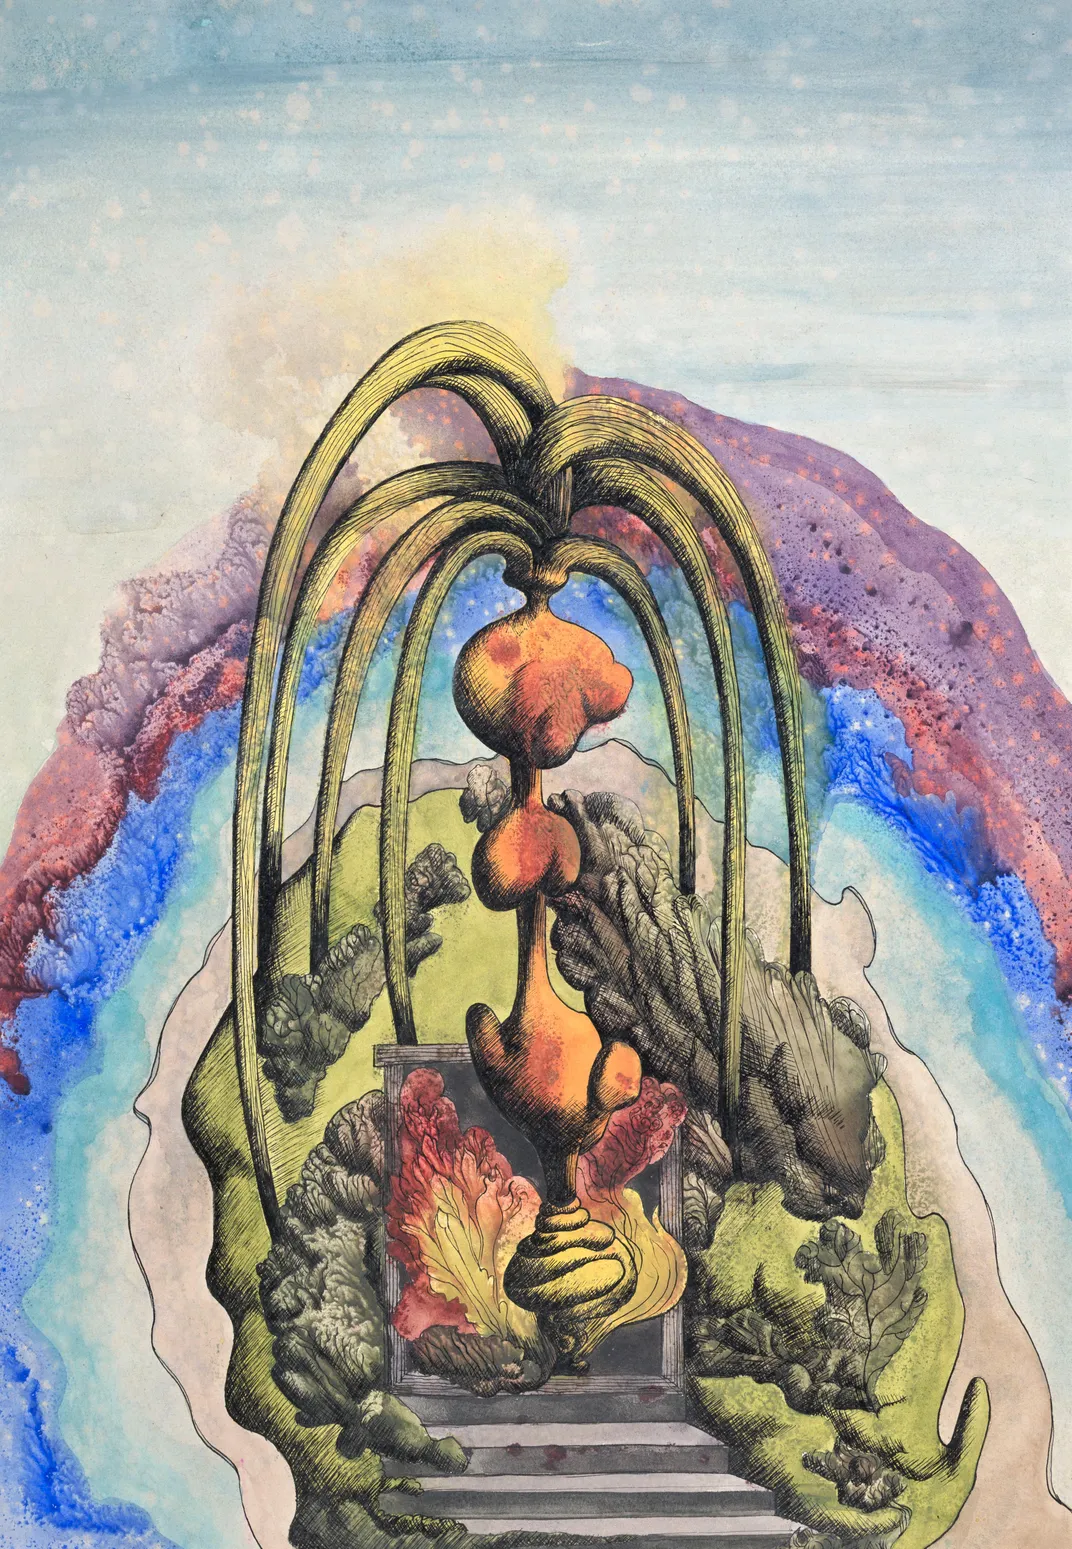 Tate Acquires Archive of Works by Little-Known Surrealist Ithell Colquhoun